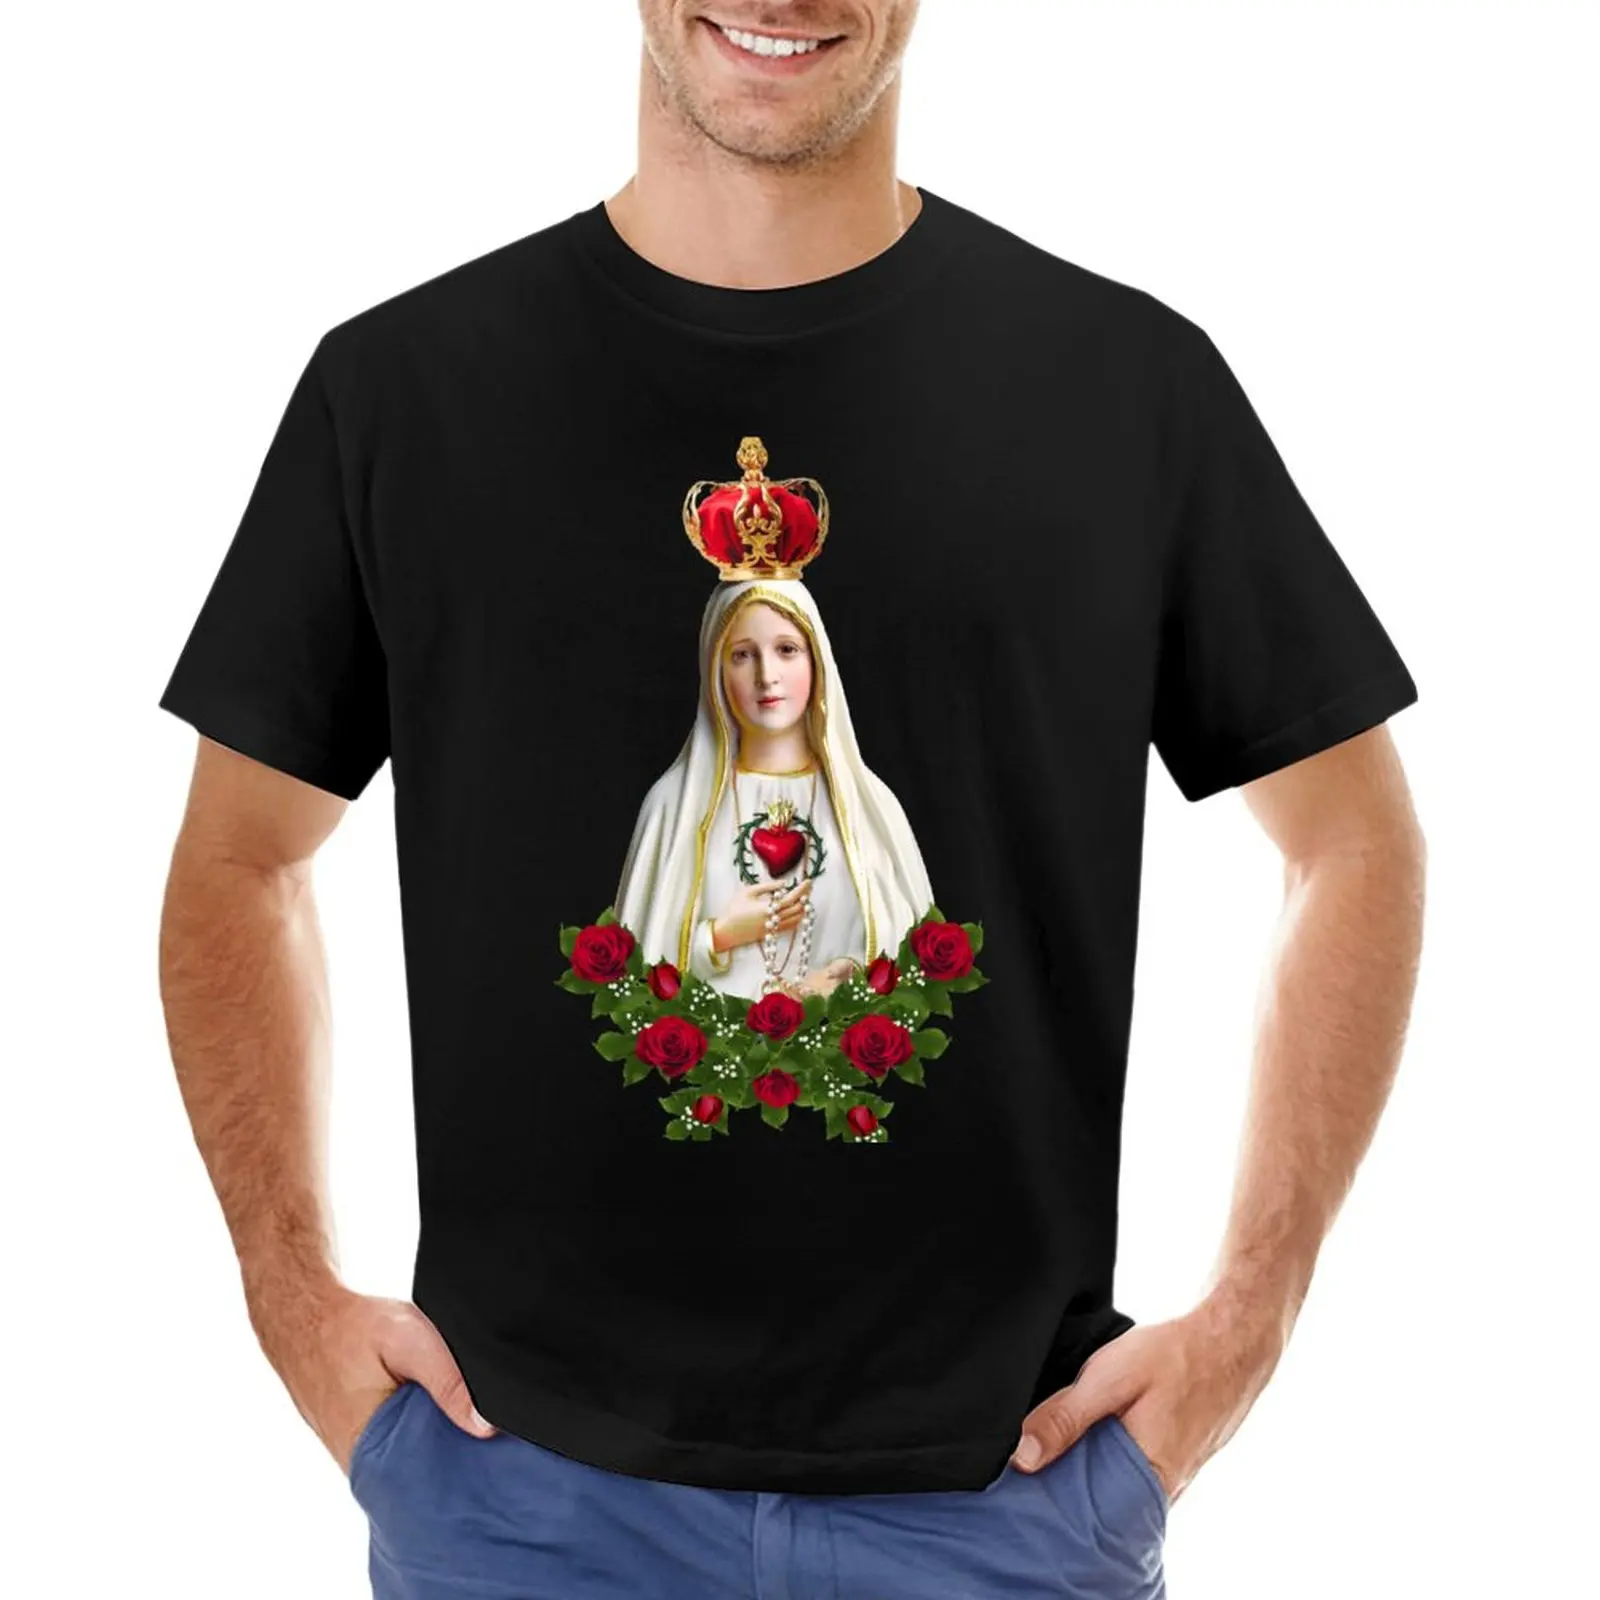 

Our Lady of Fatima T-Shirt quick-drying t-shirt summer clothes kawaii clothes mens long sleeve t shirts